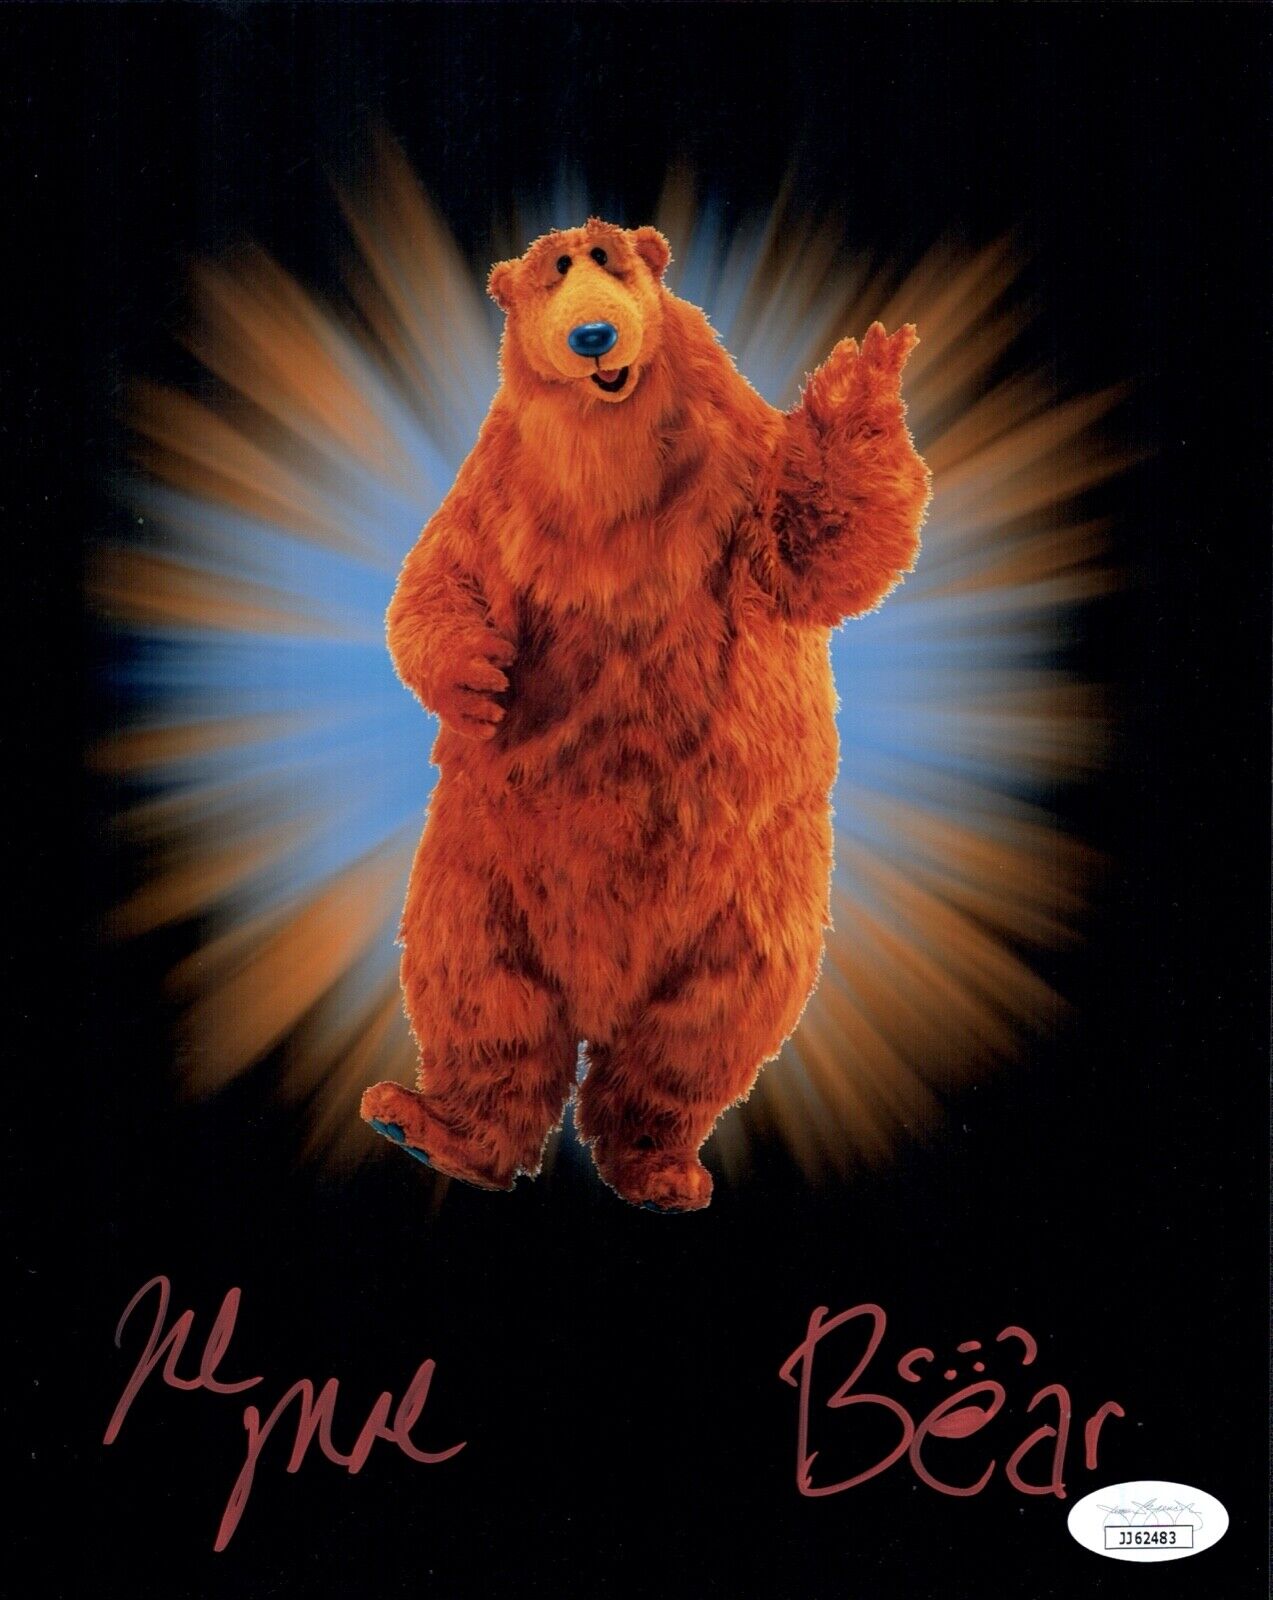 NOEL MACNEAL Signed BEAR IN THE BIG BLUE HOUSE 8x10 Photo Poster painting Autograph JSA COA Cert